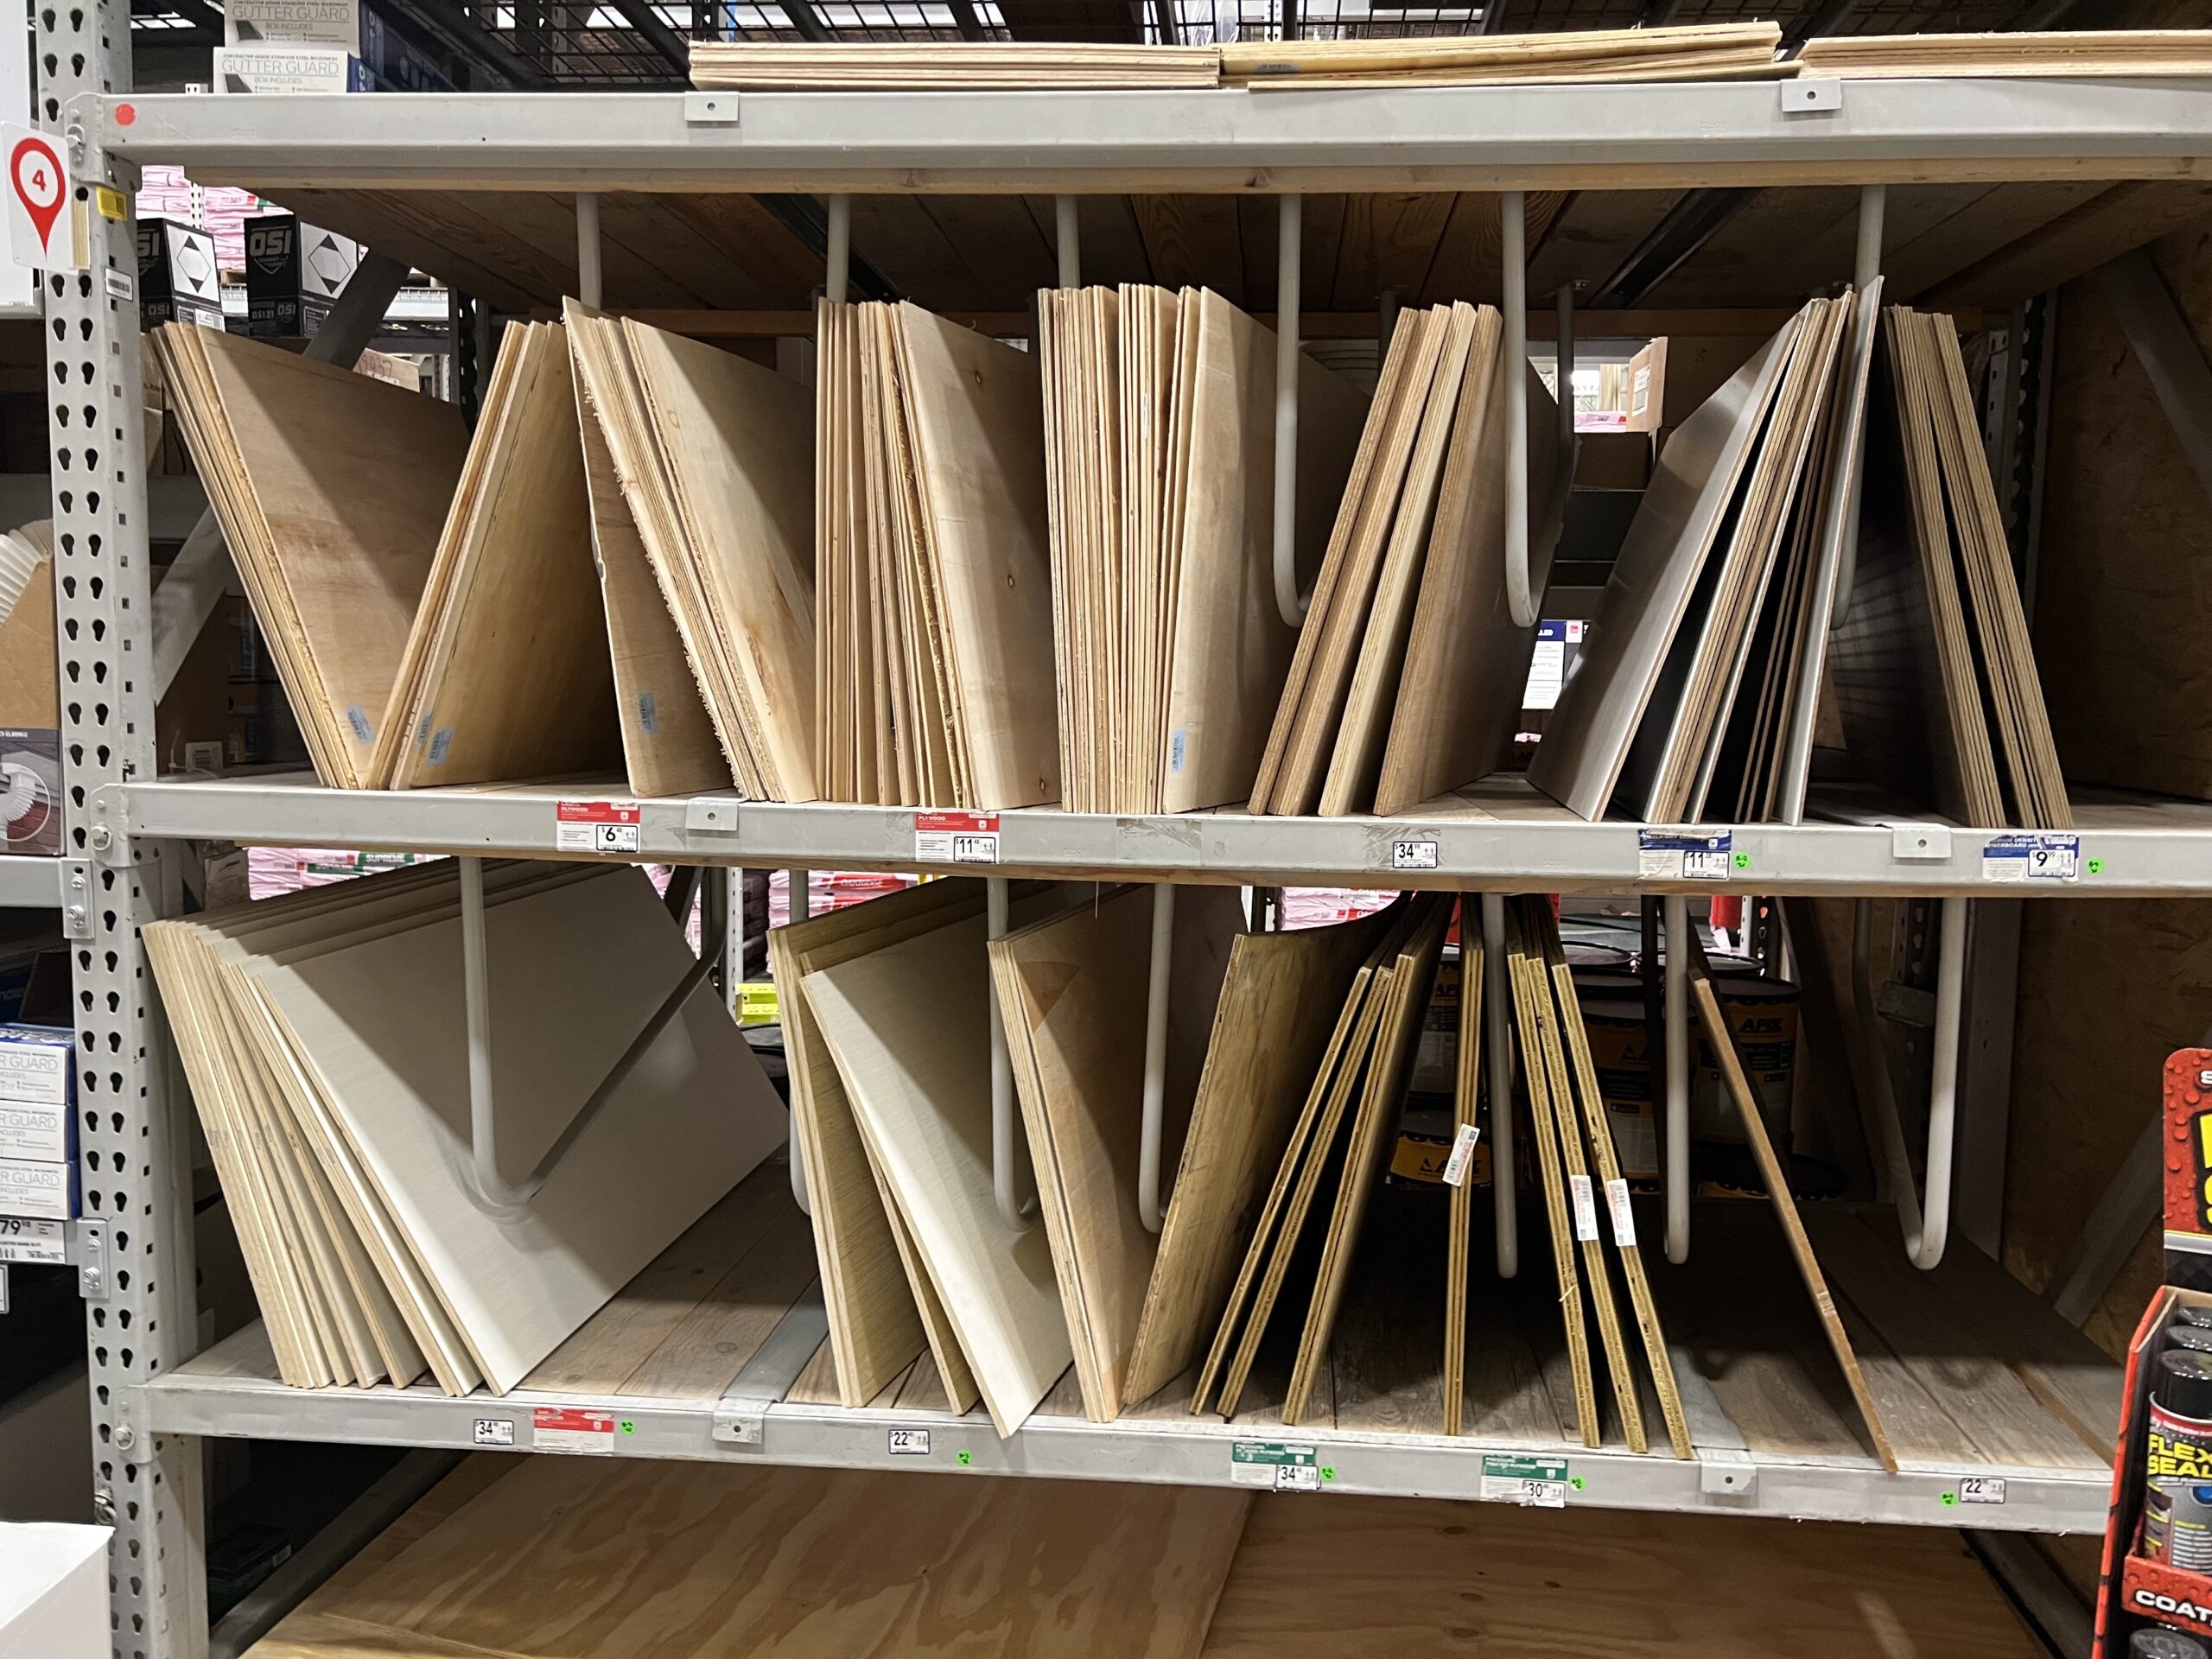 Where do you buy wood sheets to cut? I'm not paying $17 for two